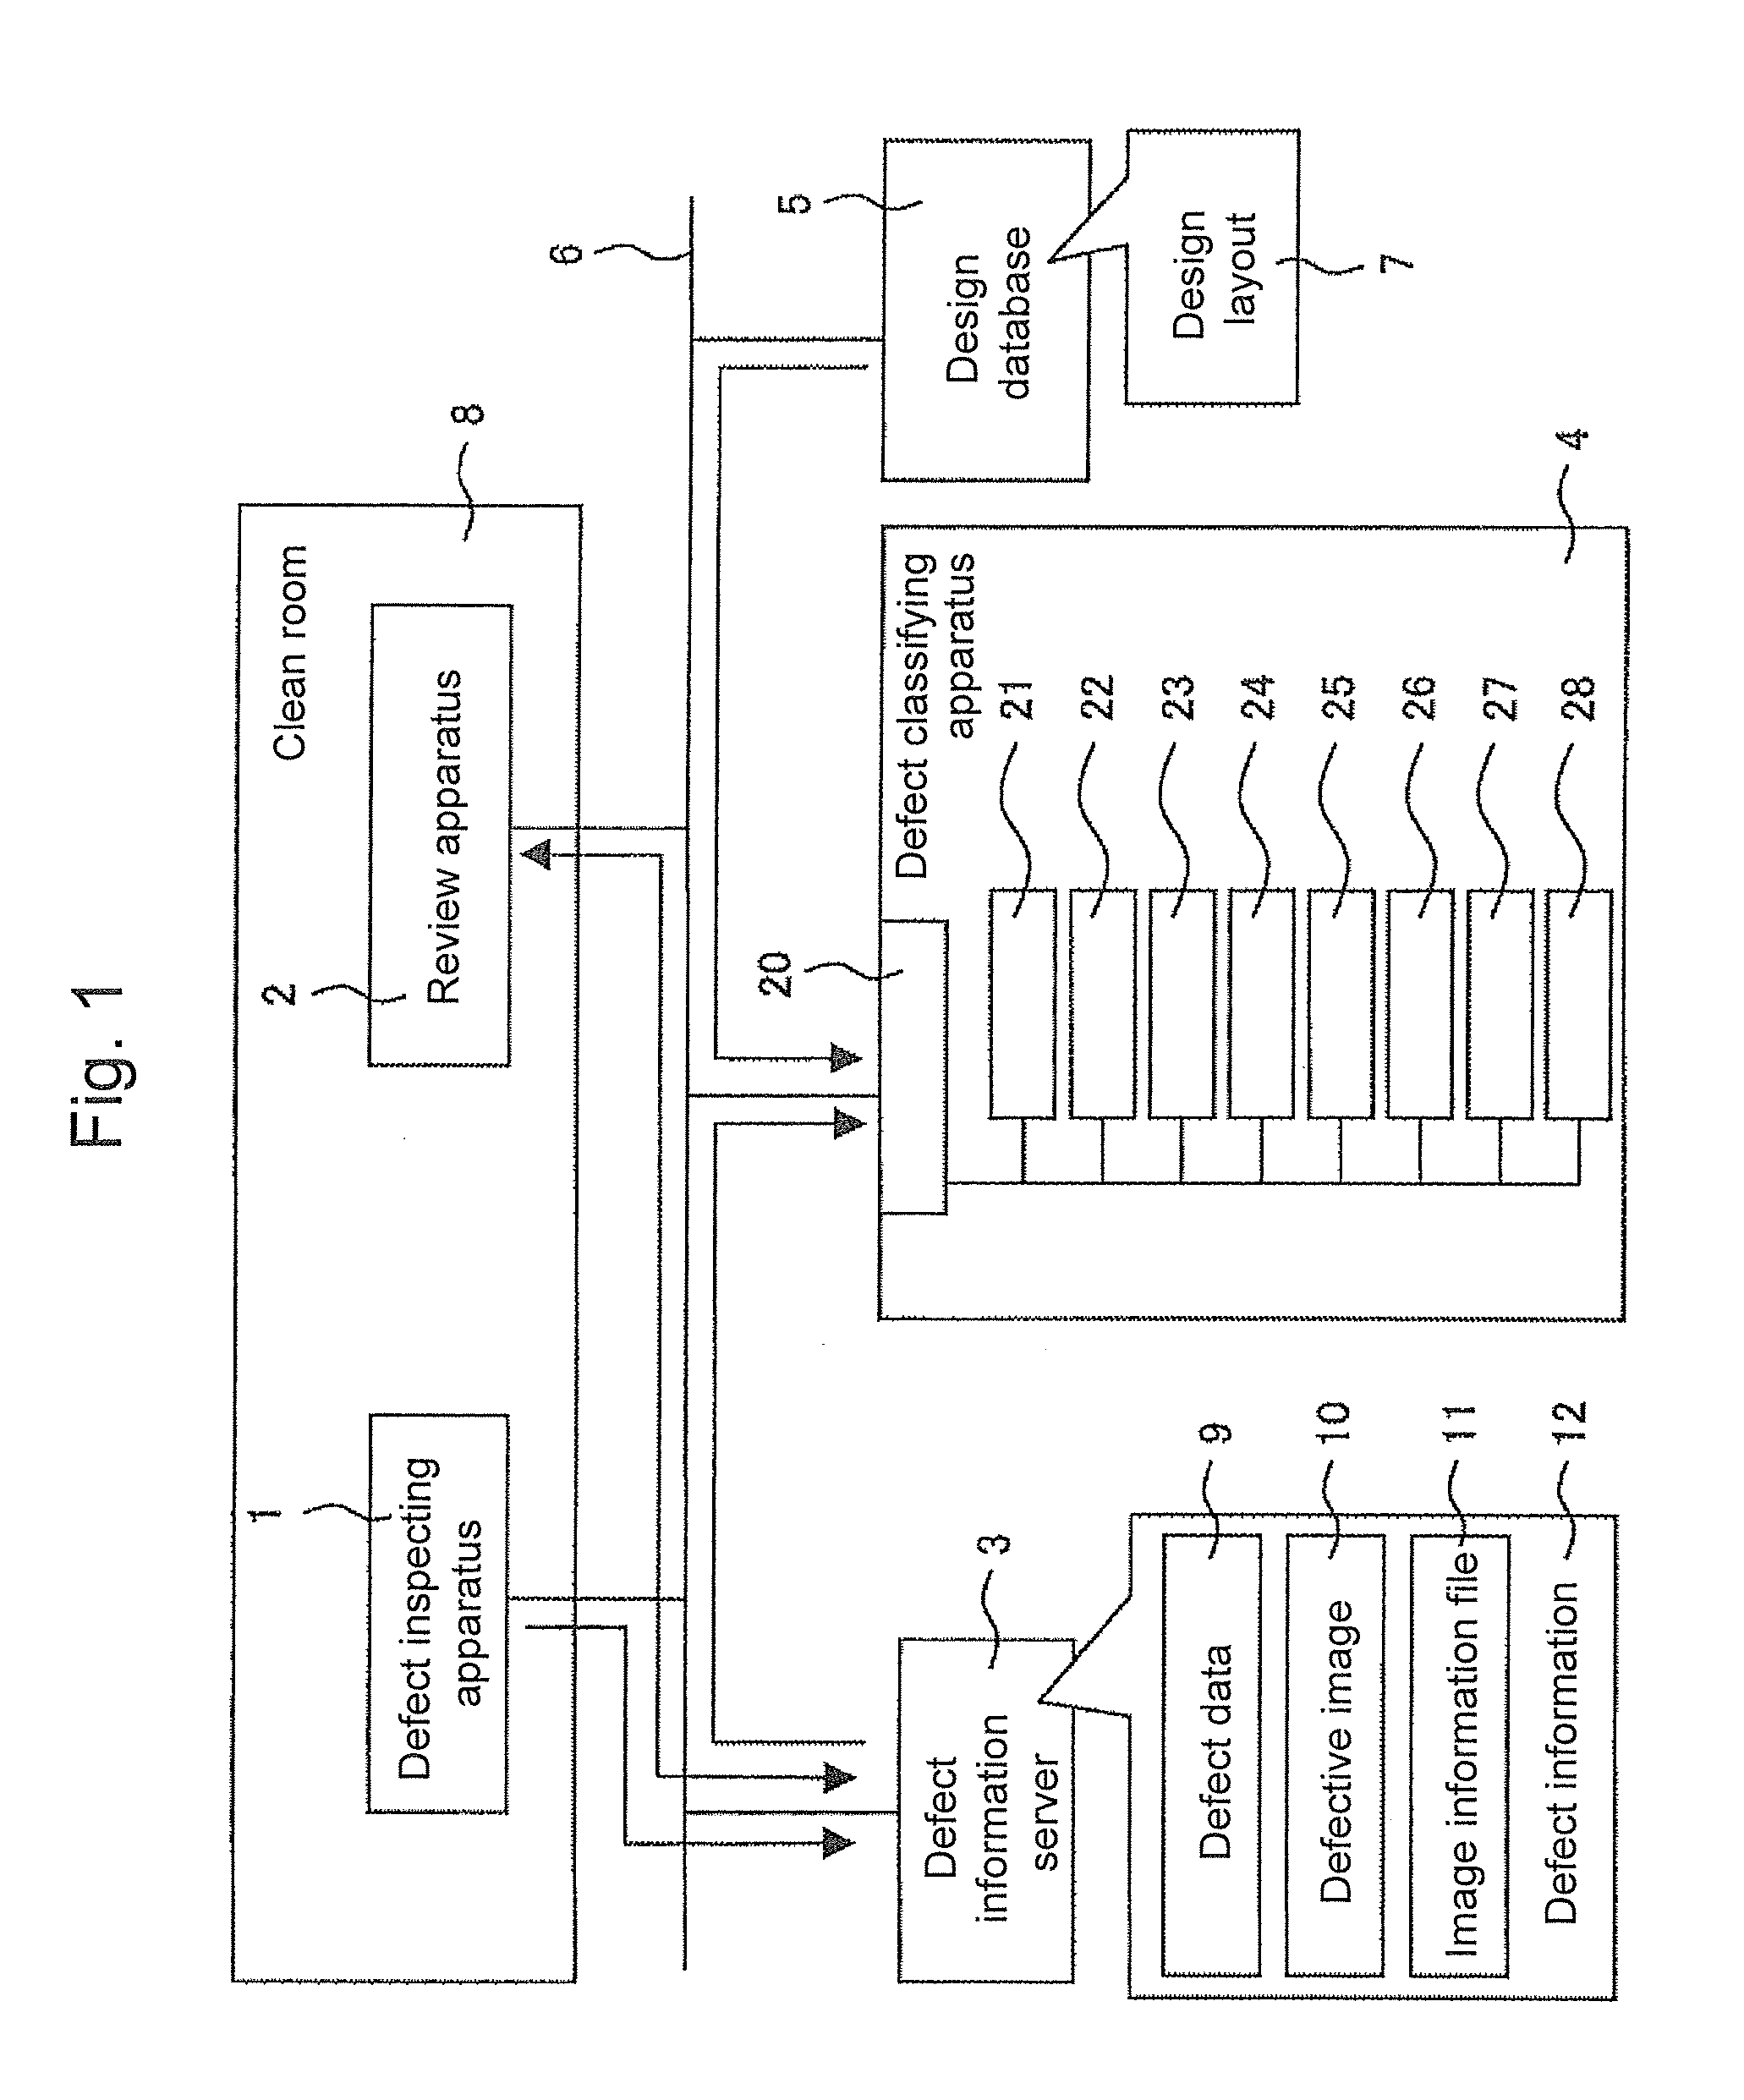 Semiconductor defect classifying method, semiconductor defect classifying apparatus, and semiconductor defect classifying program